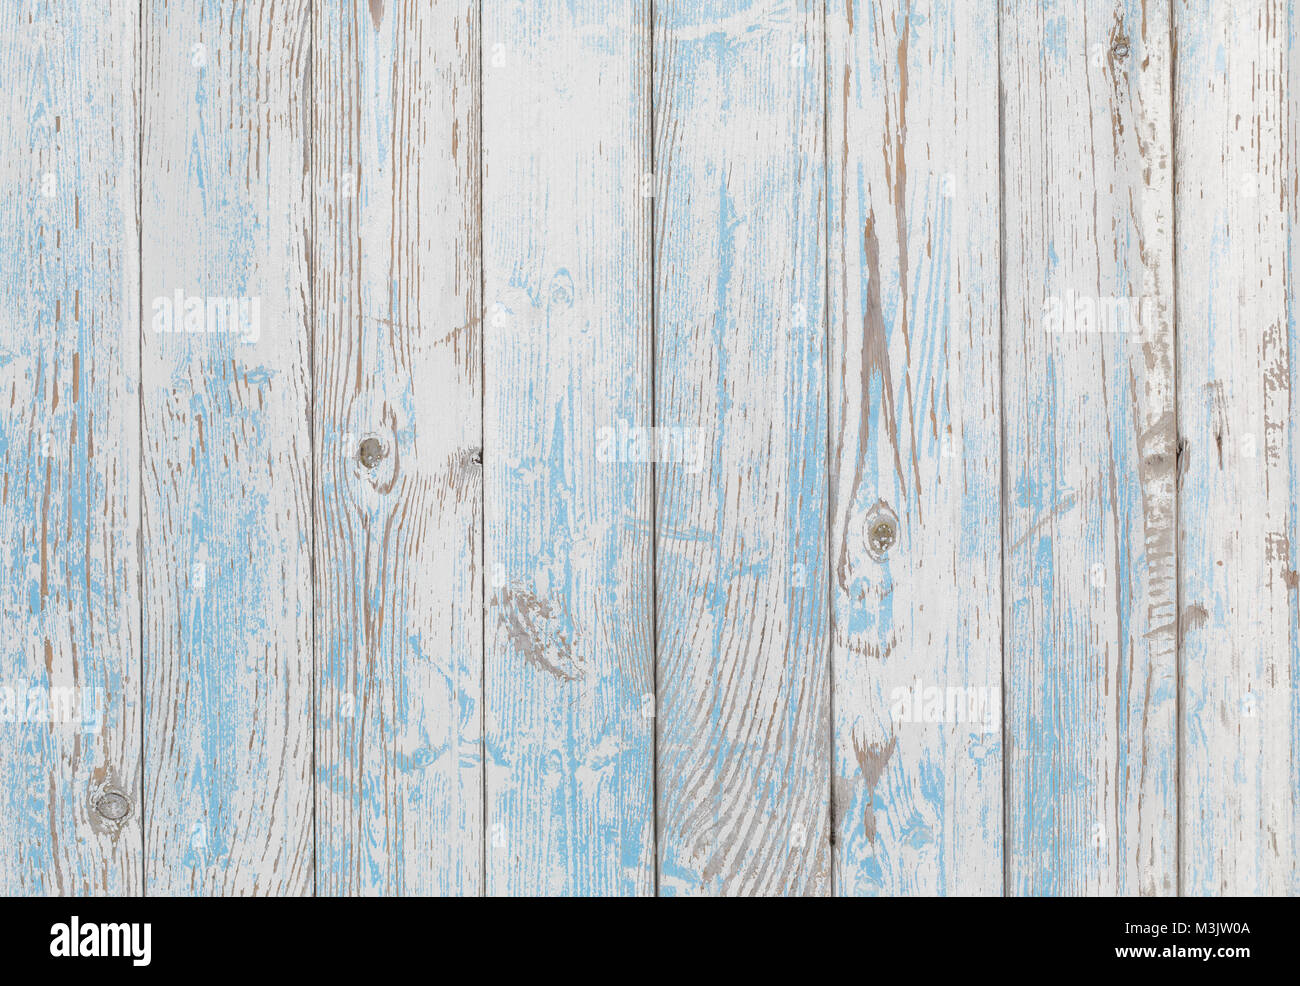 wood texture background blue and white Stock Photo